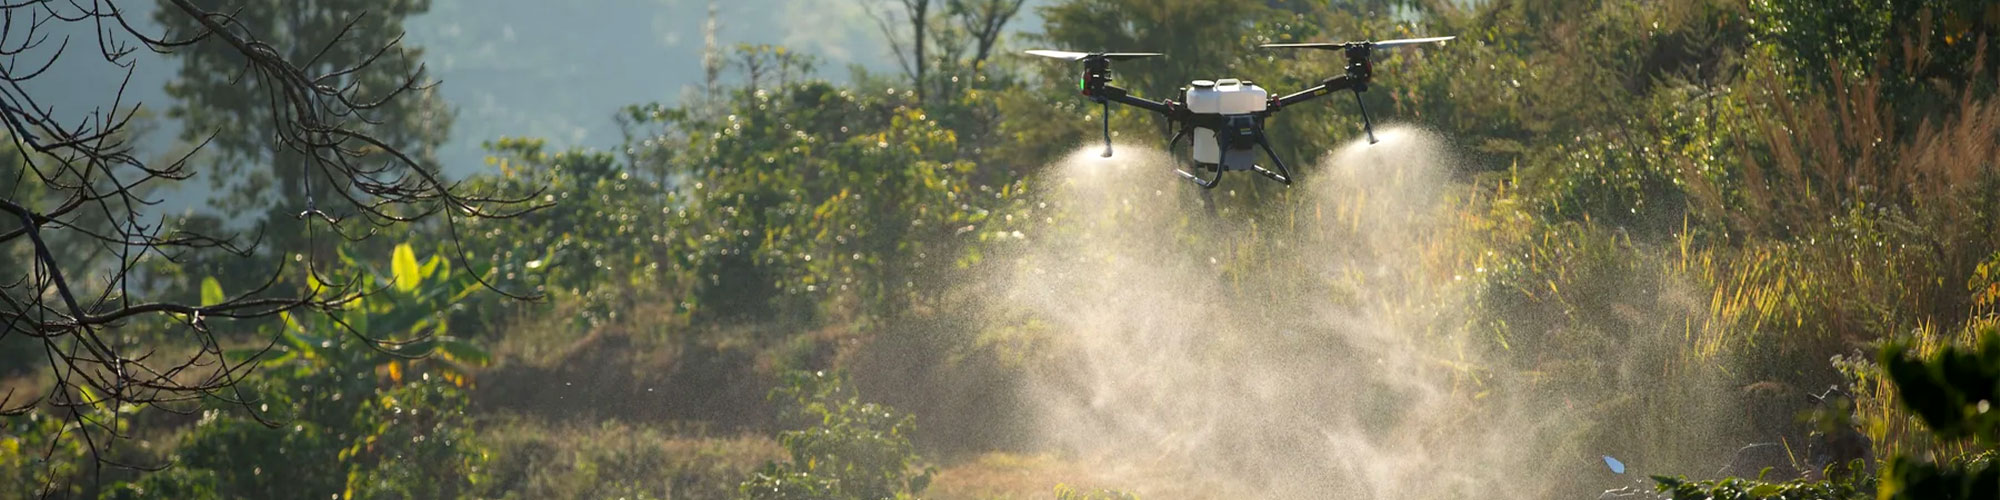 agriculture field spray drone